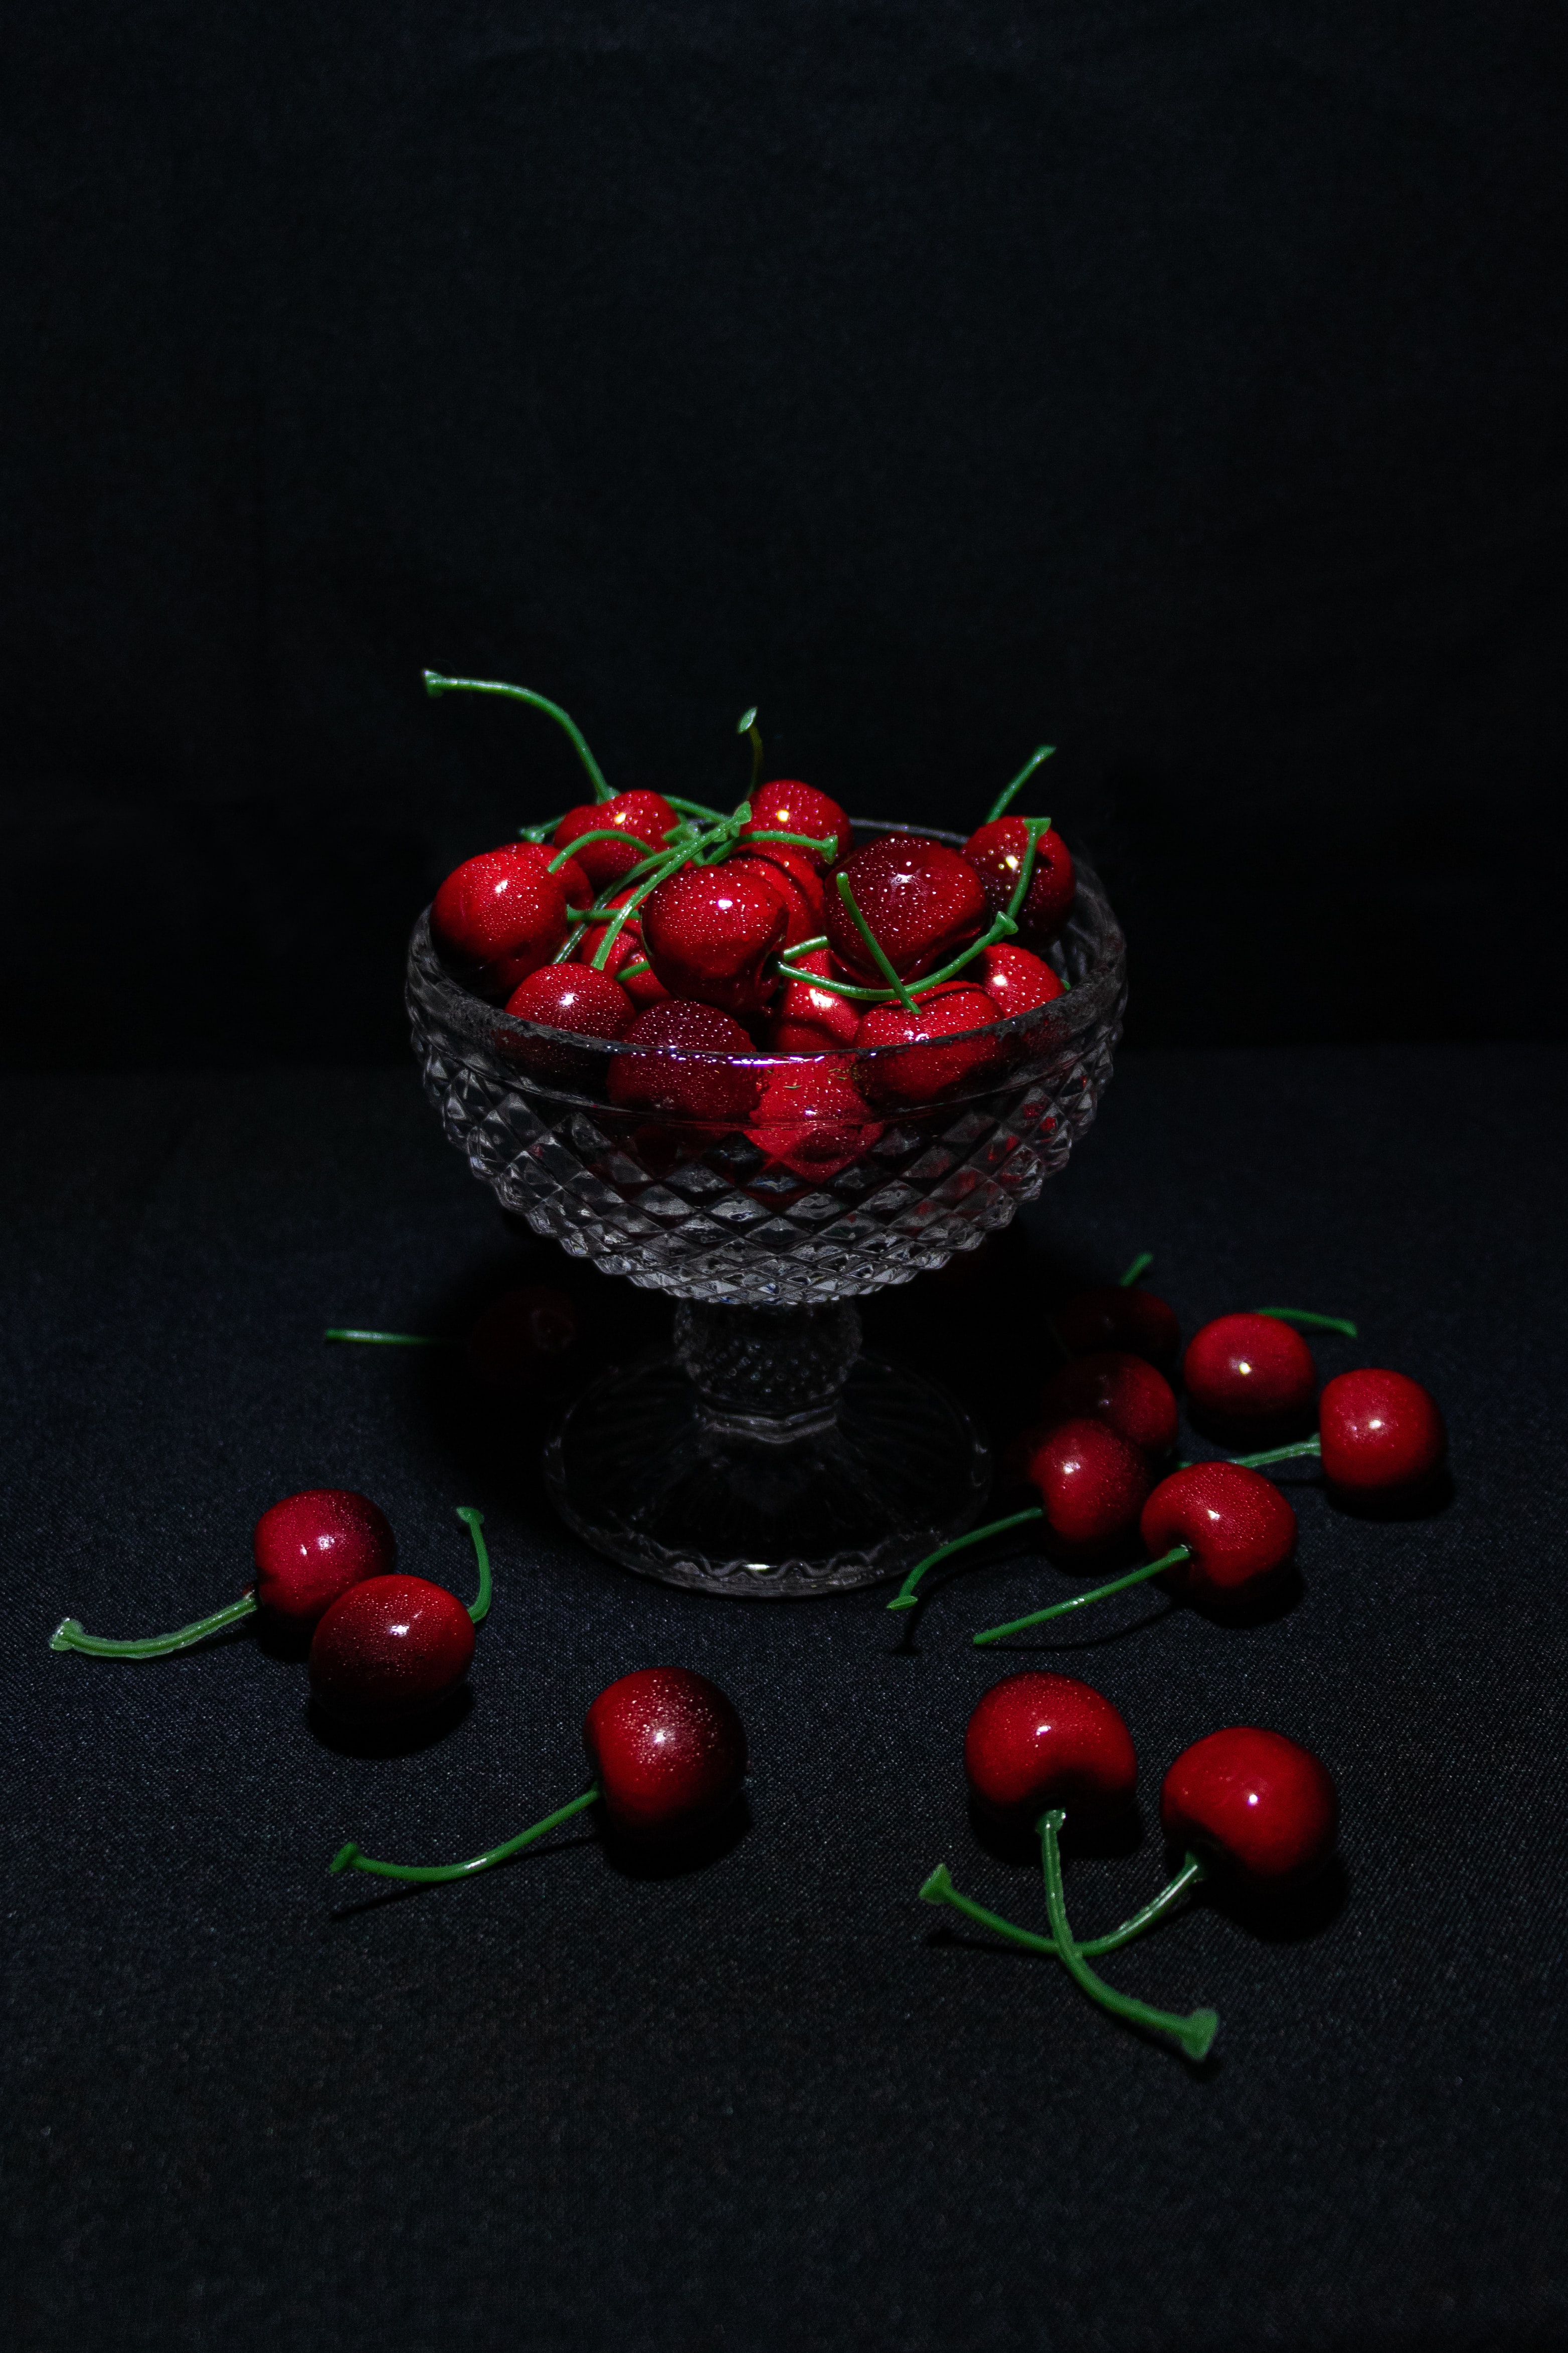 fruits, cherry, sweet cherry, berry, food, drops, wet High Definition image